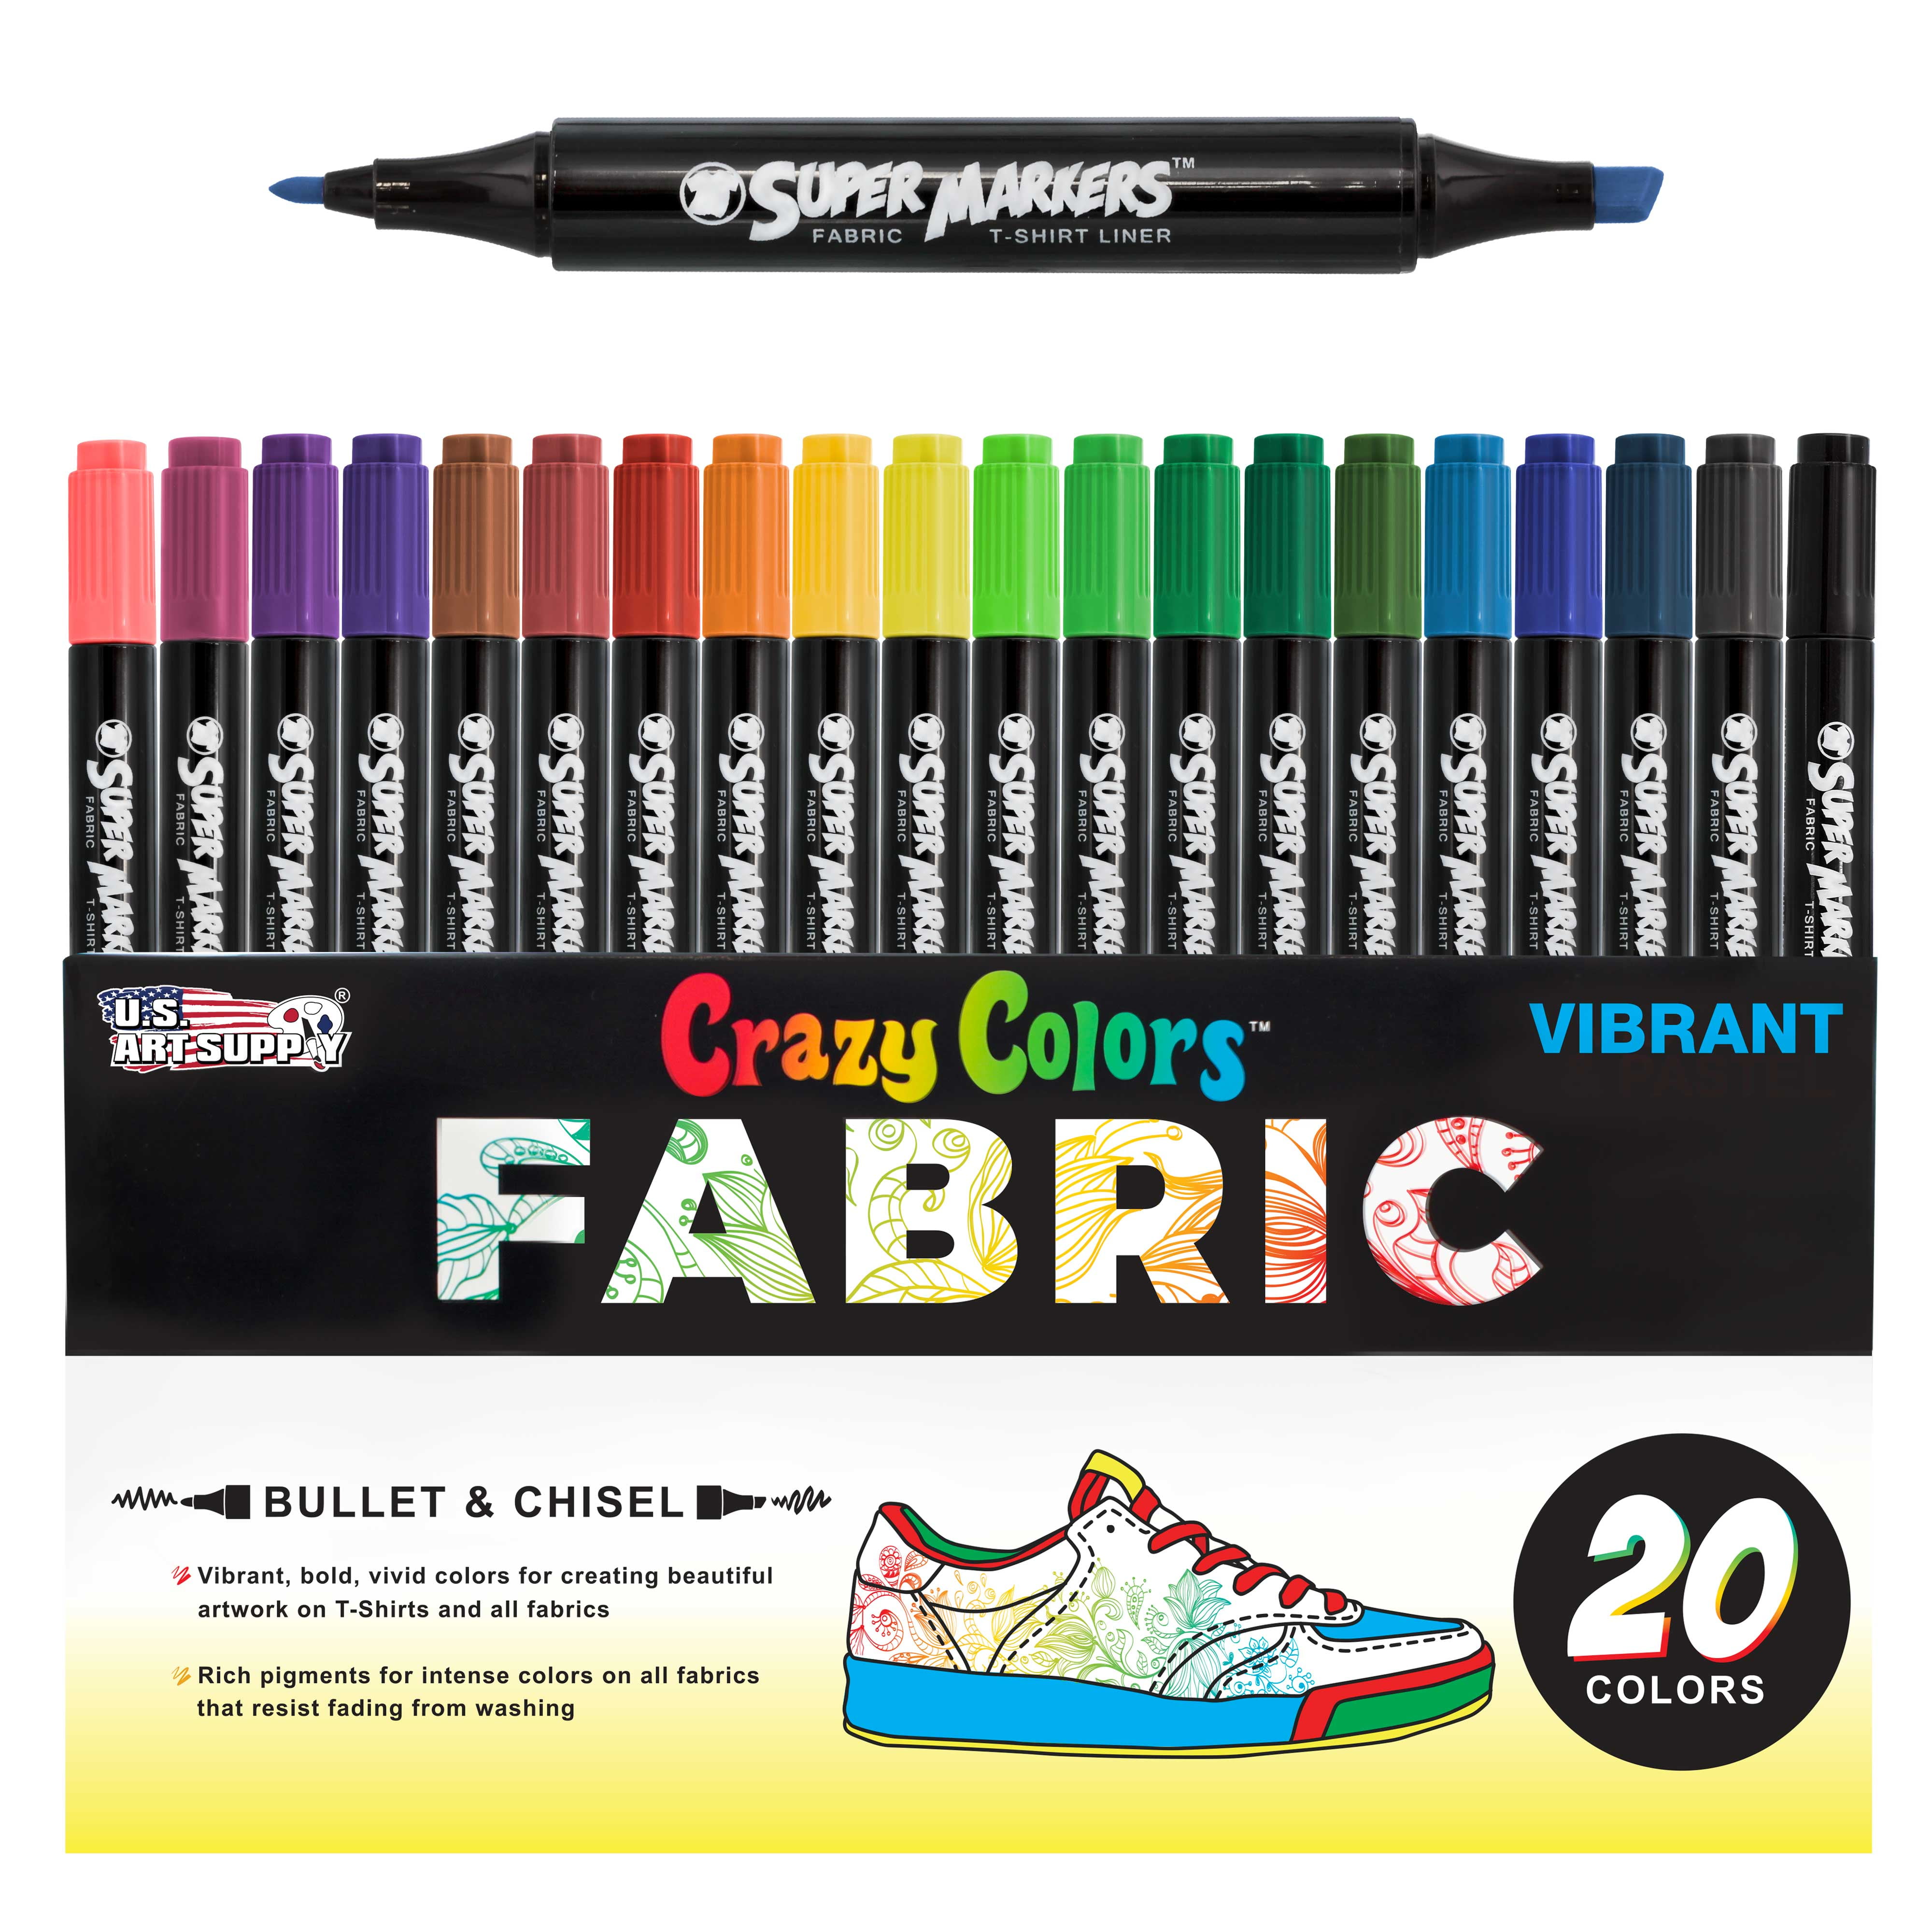 SHARPIE 22478 Flip Chart Markers, Bullet Tip, Colors may vary, 8-Count,  Colors may vary(Box)